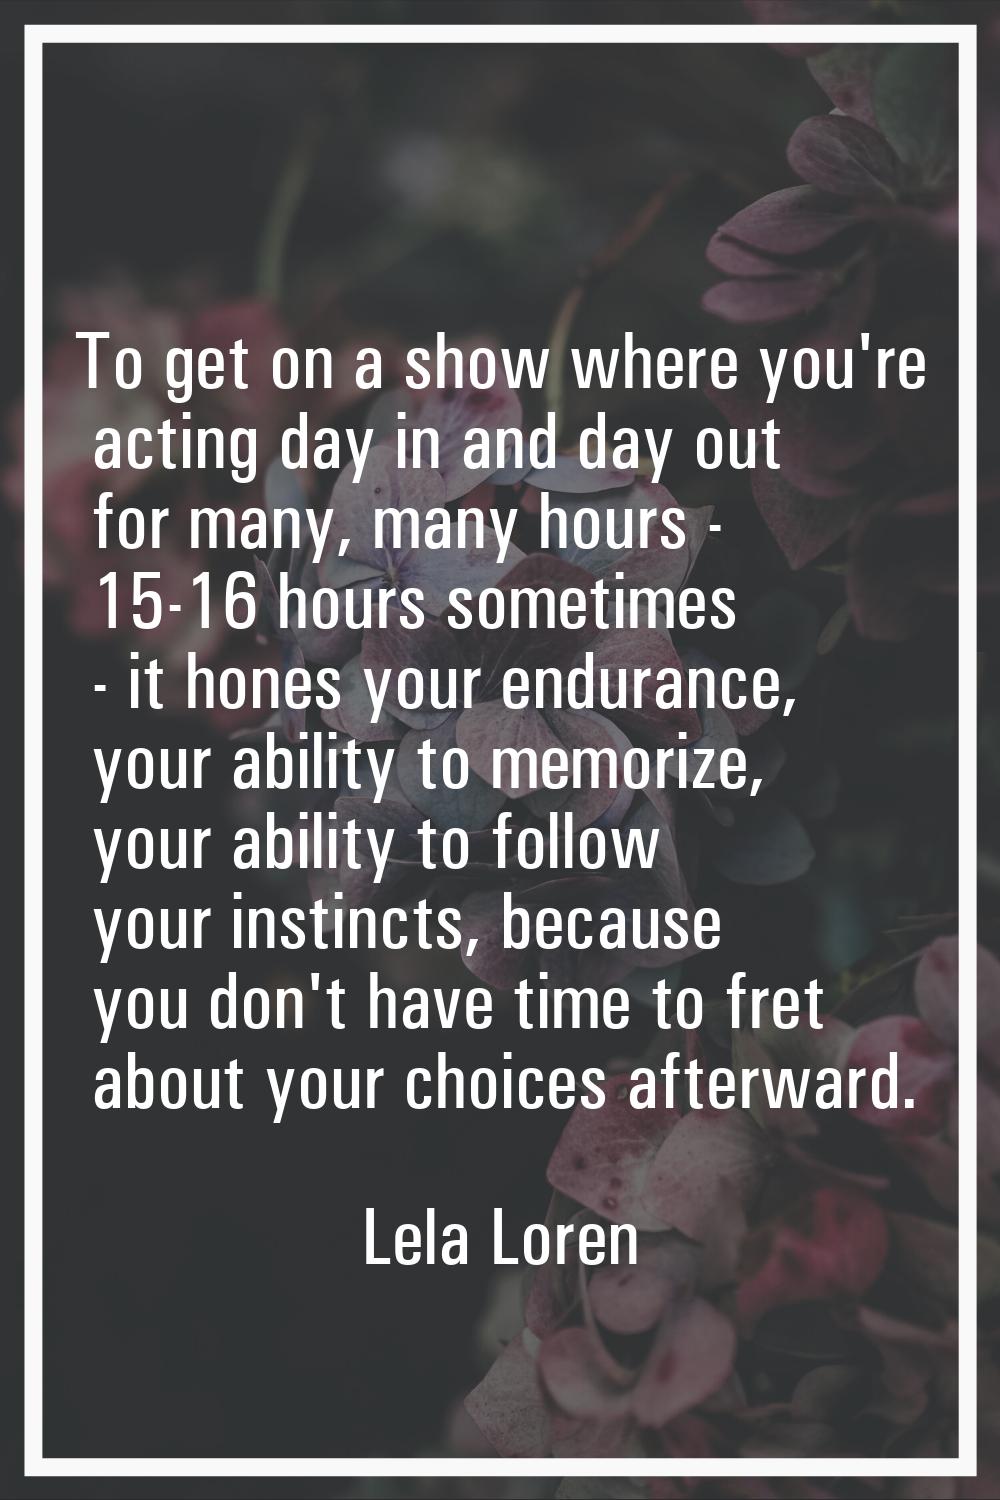 To get on a show where you're acting day in and day out for many, many hours - 15-16 hours sometime